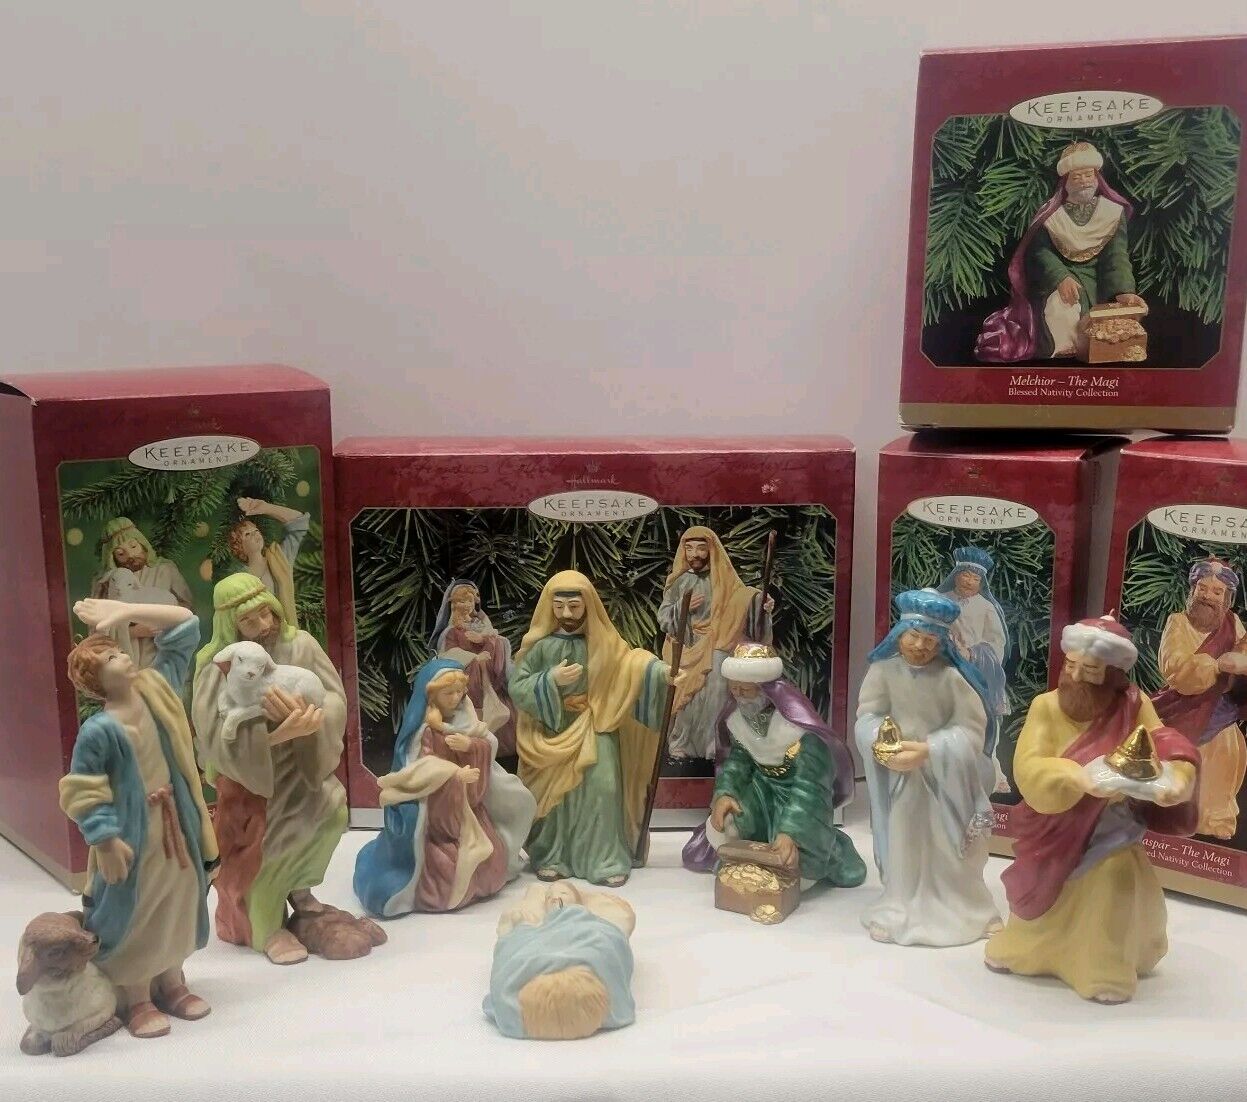 Lot 5 Hallmark Keepsake Ornaments Blessed Nativity Collection 8 Figures Complete